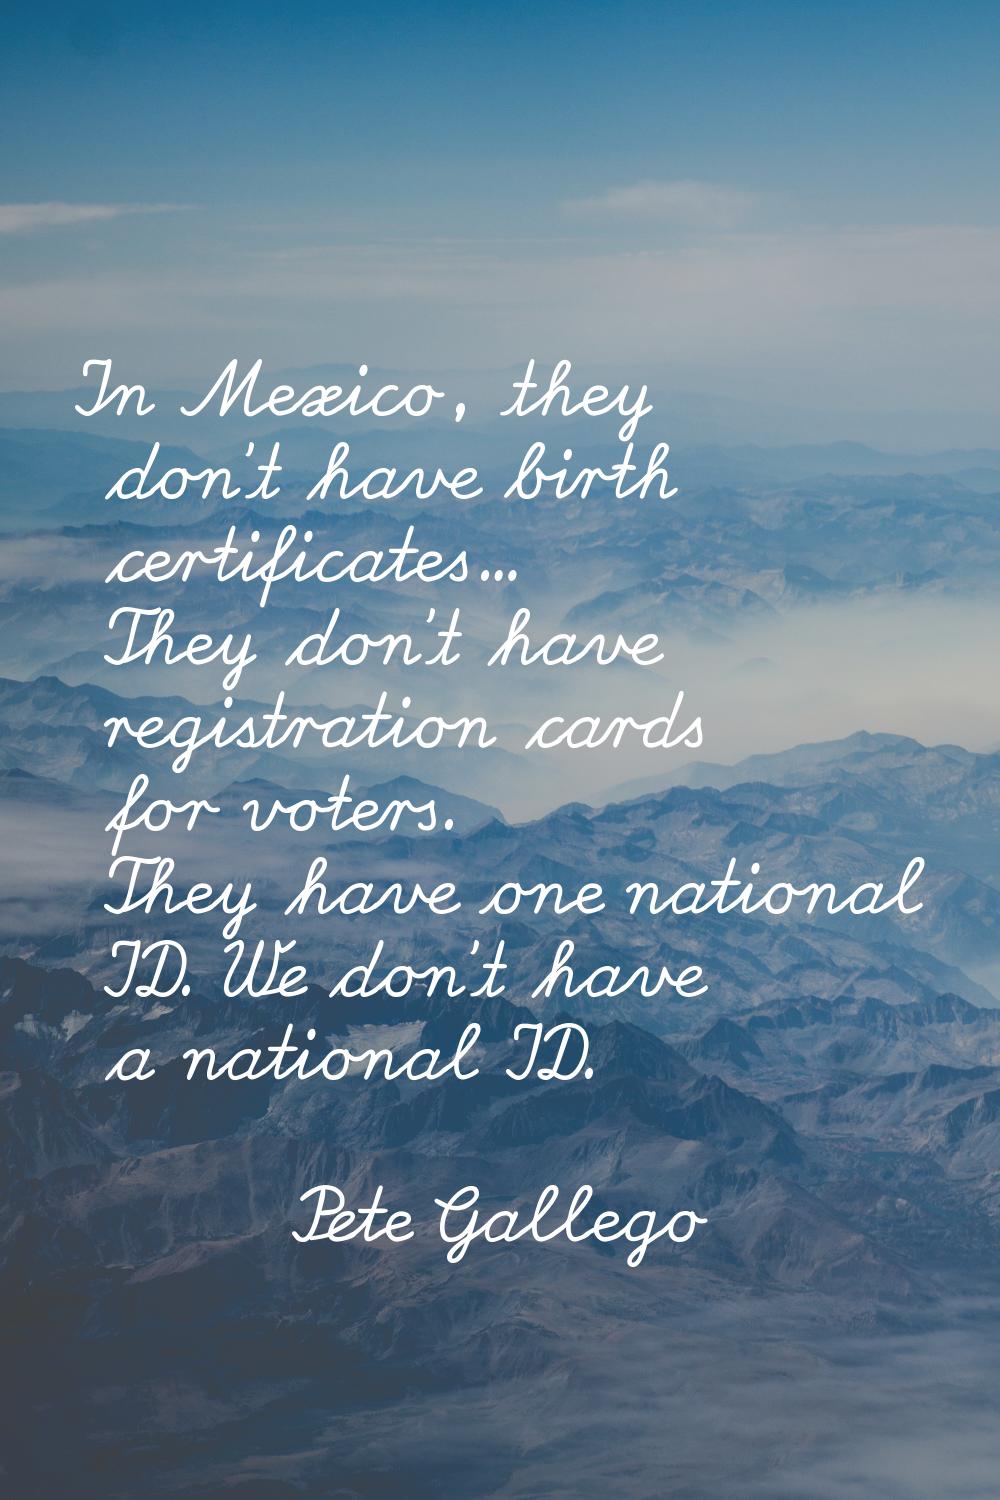 In Mexico, they don't have birth certificates... They don't have registration cards for voters. The